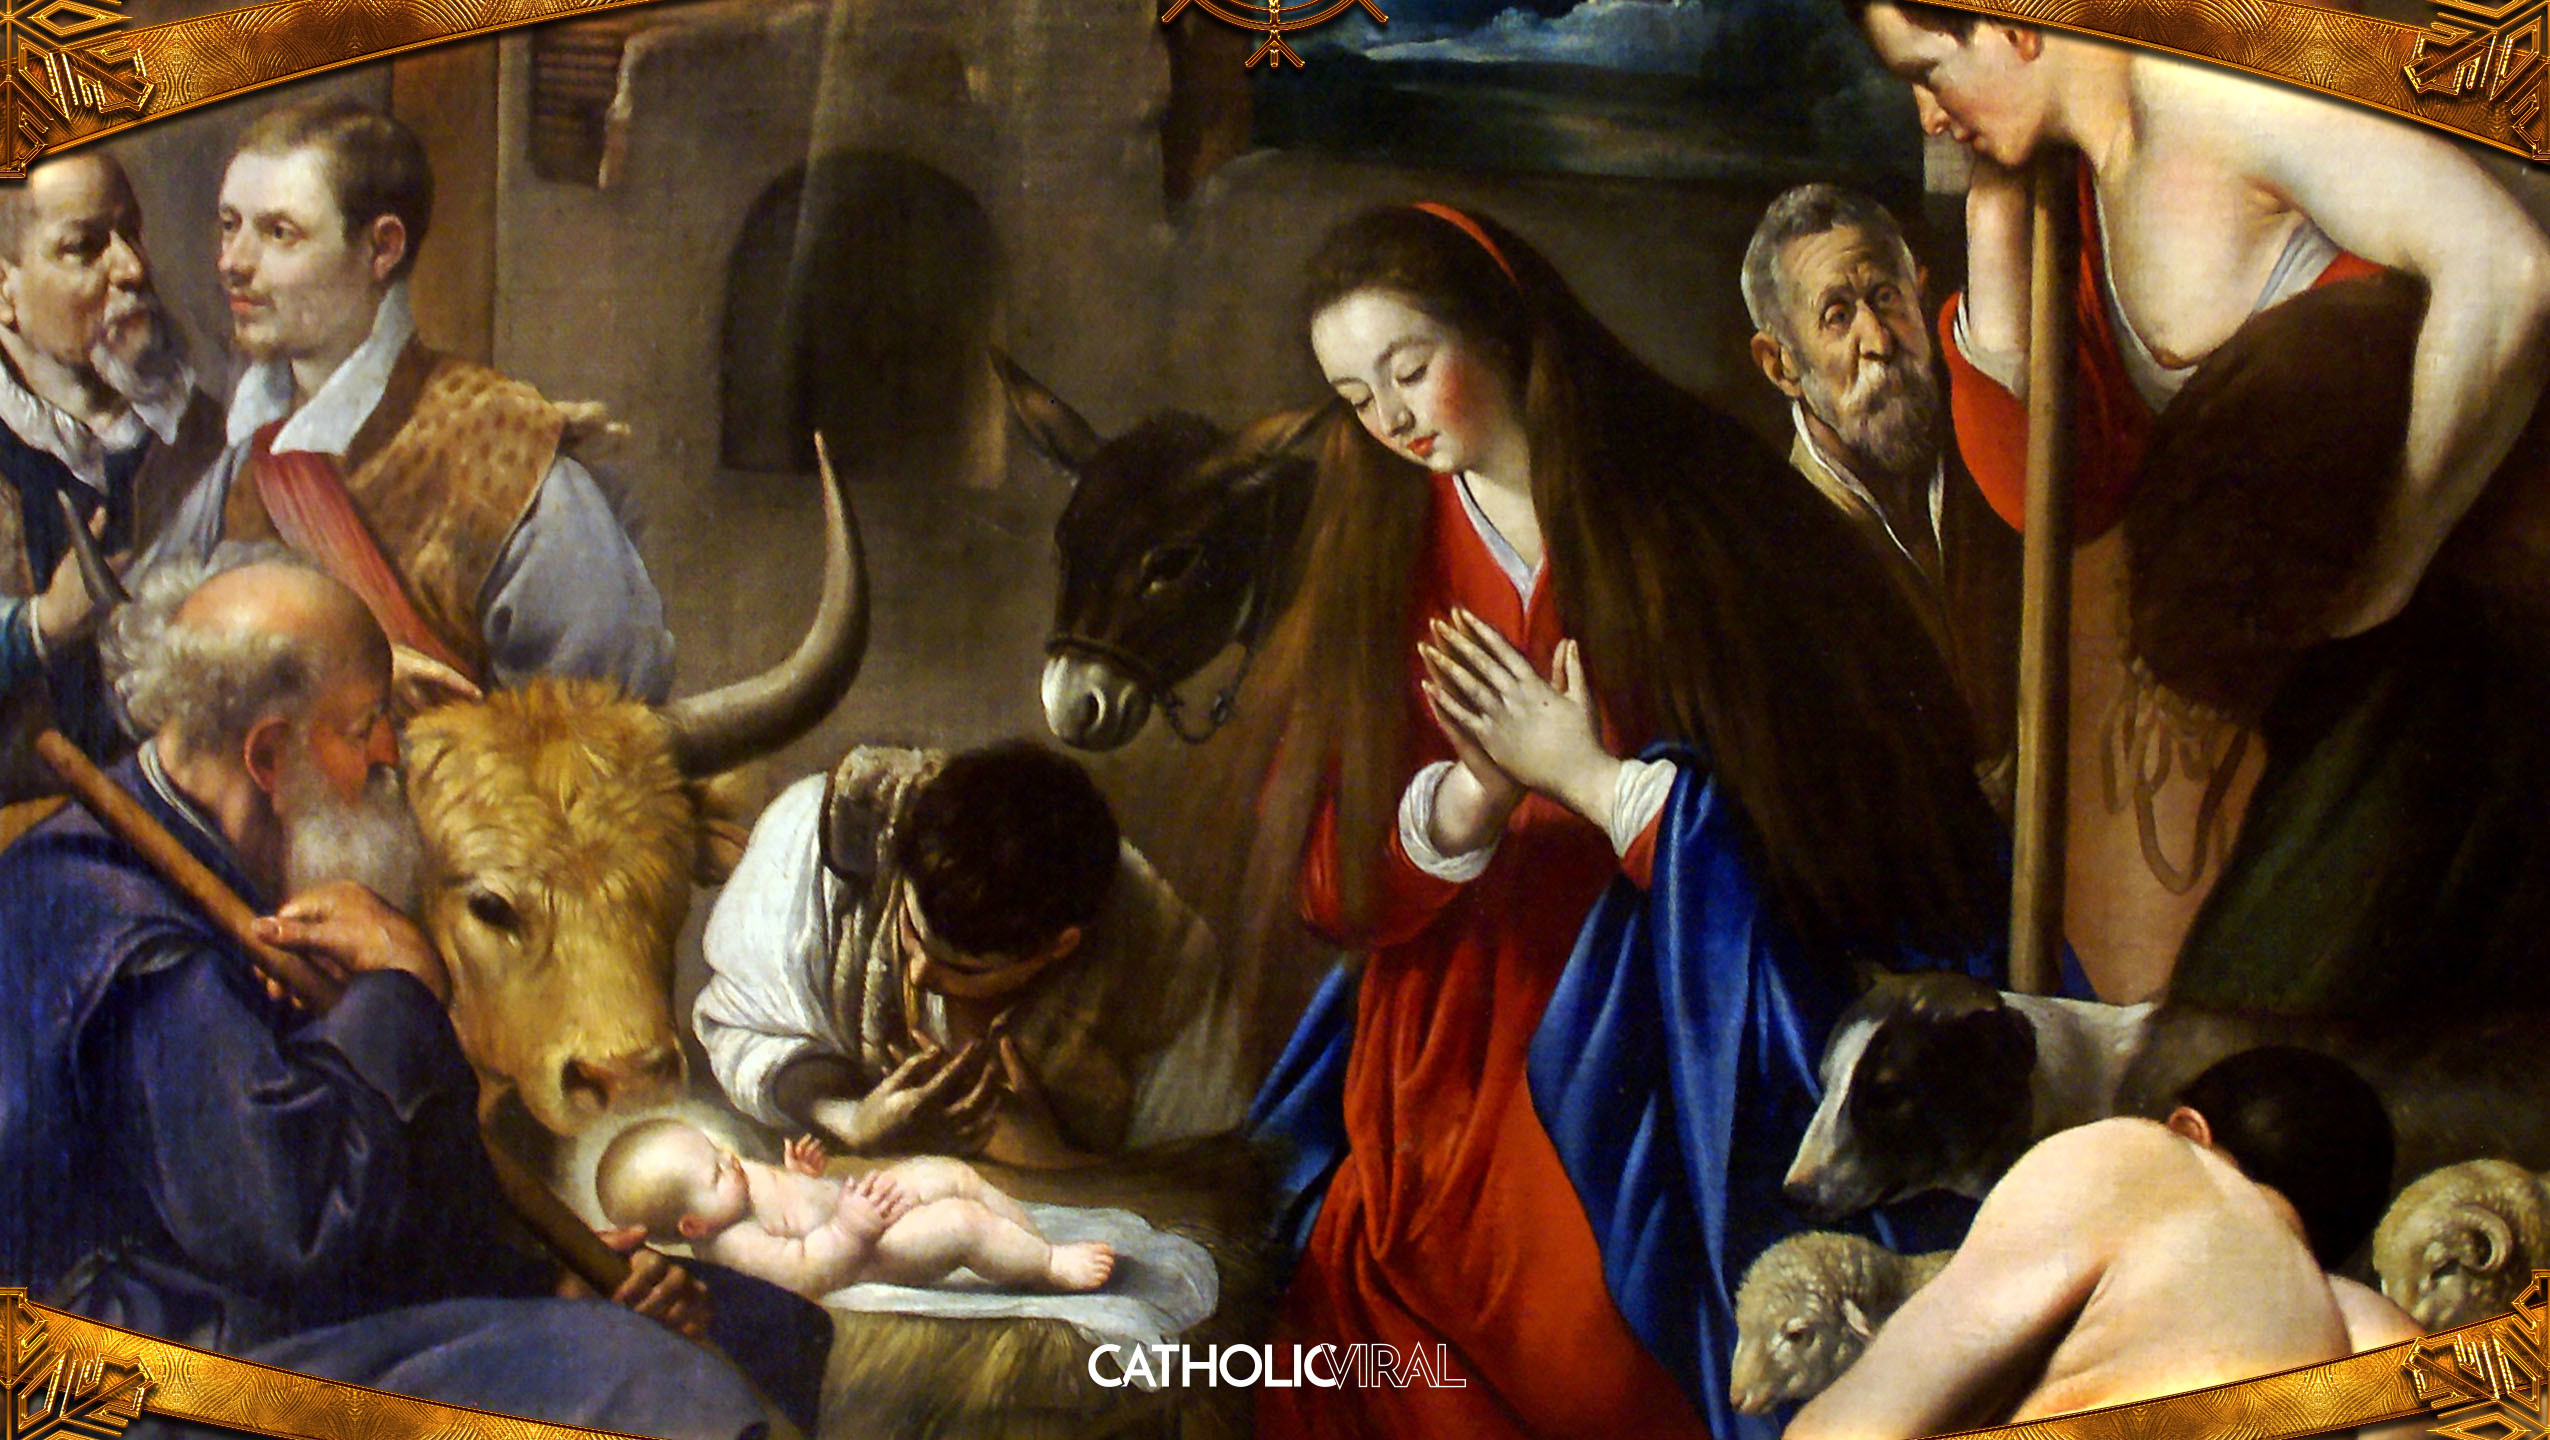 2550x1440 18 Gorgeous Classical Paintings - HD Christmas Wallpapers - The Adoration  of the Shepherds at the